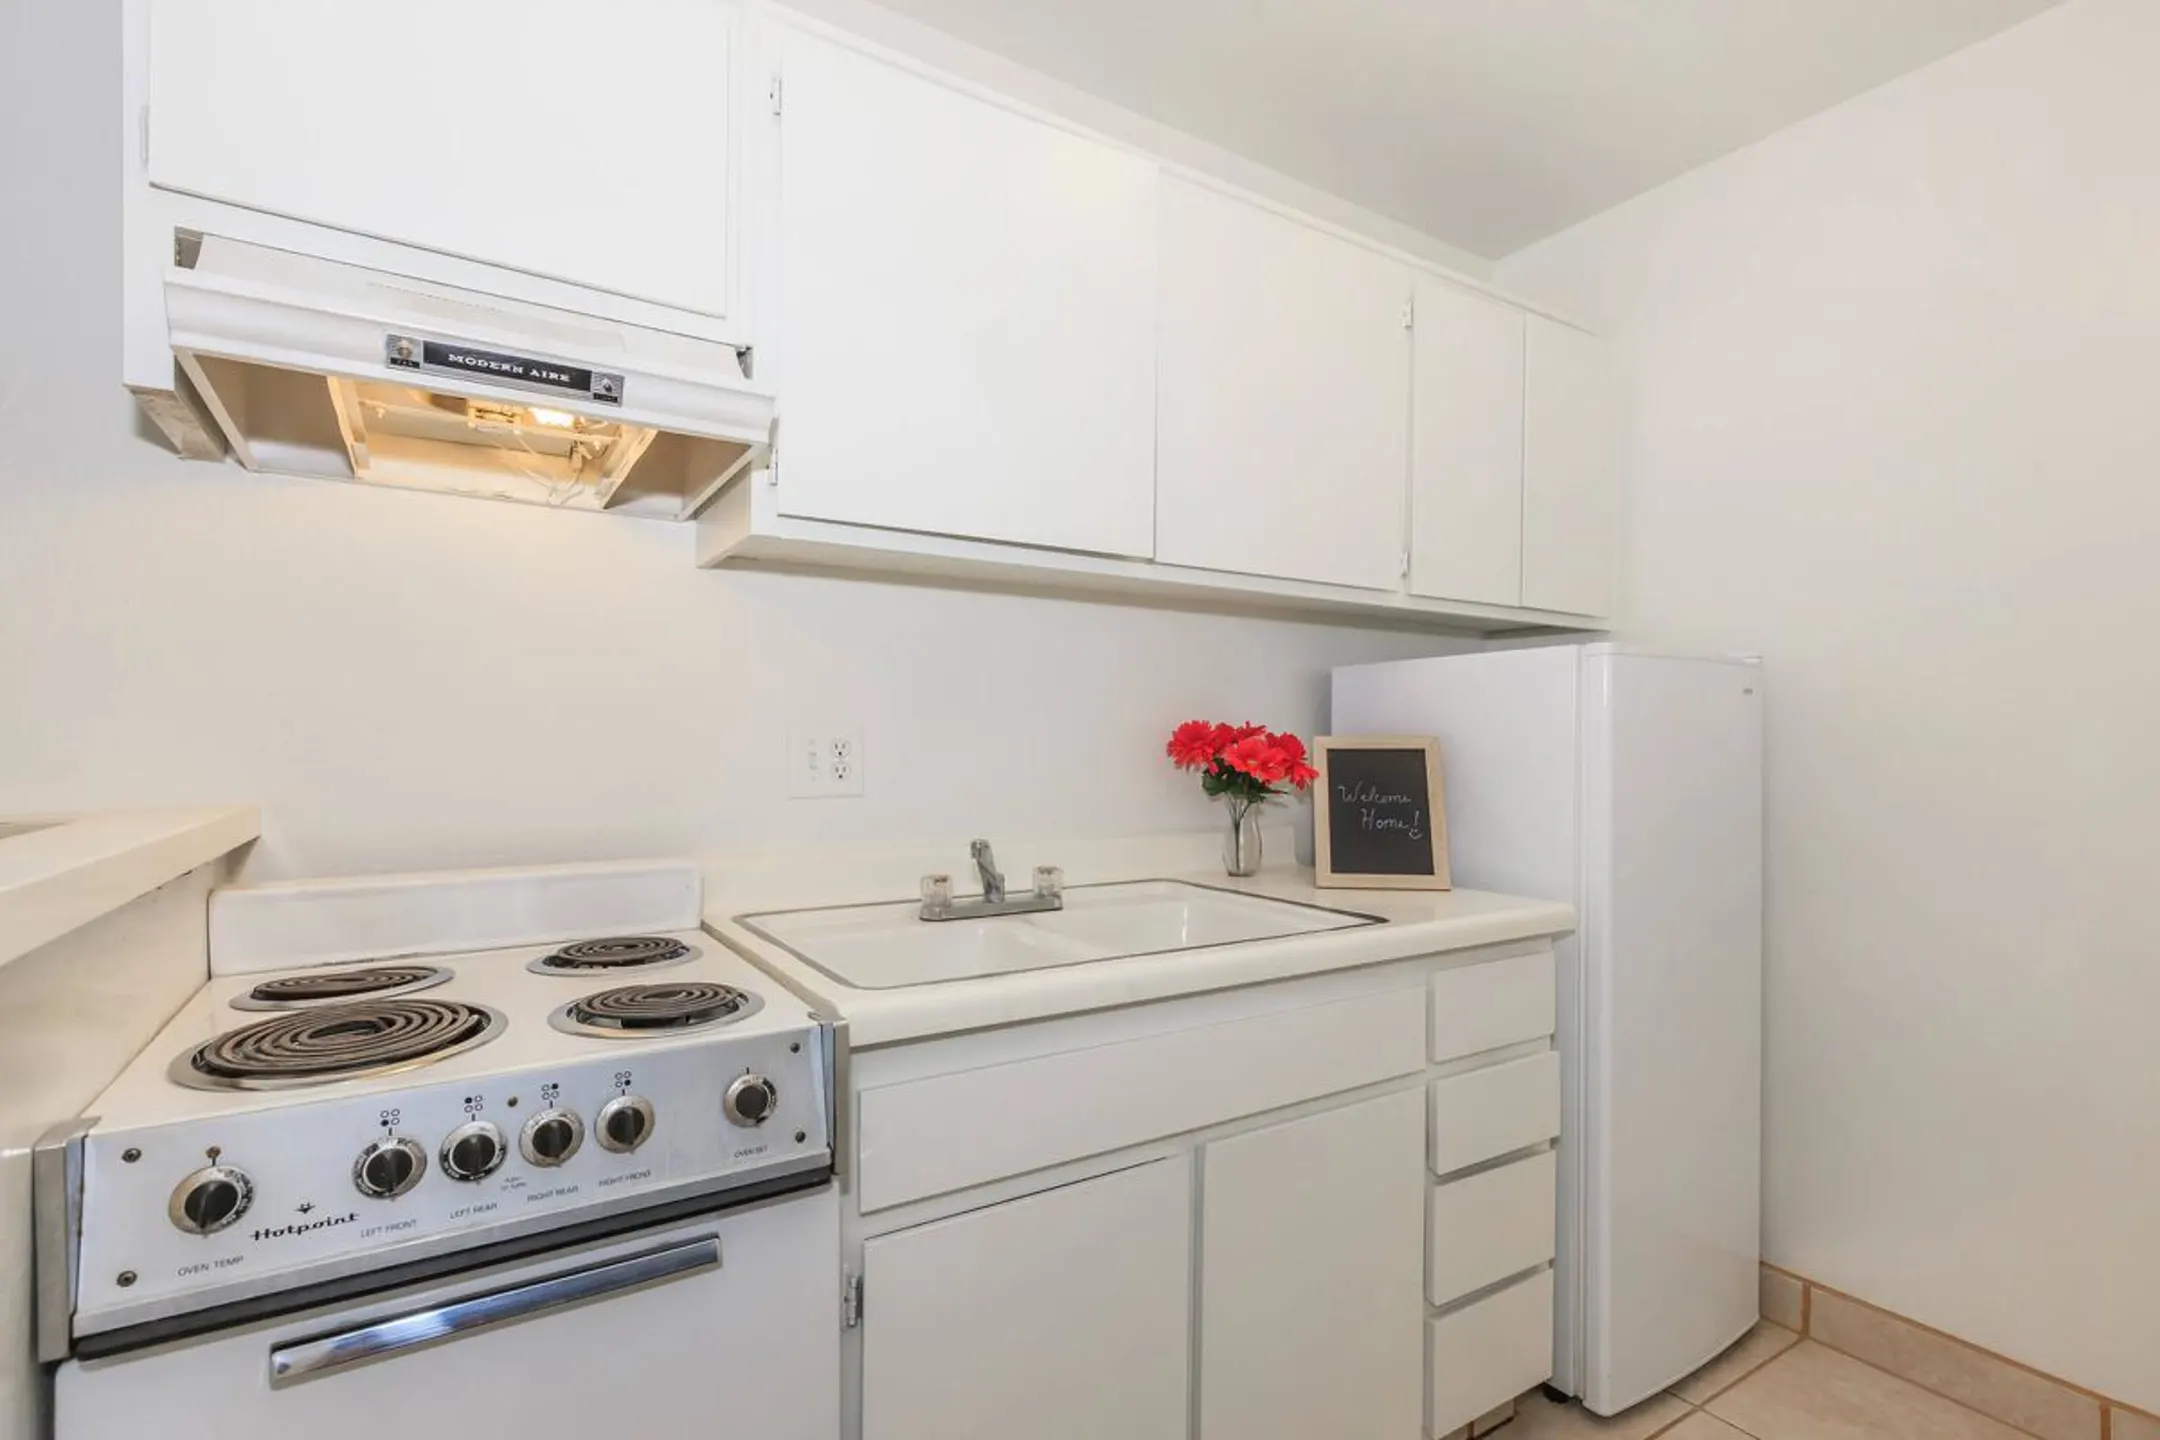 Kitchen - Pacific Terrace Apartments - Bakersfield, CA